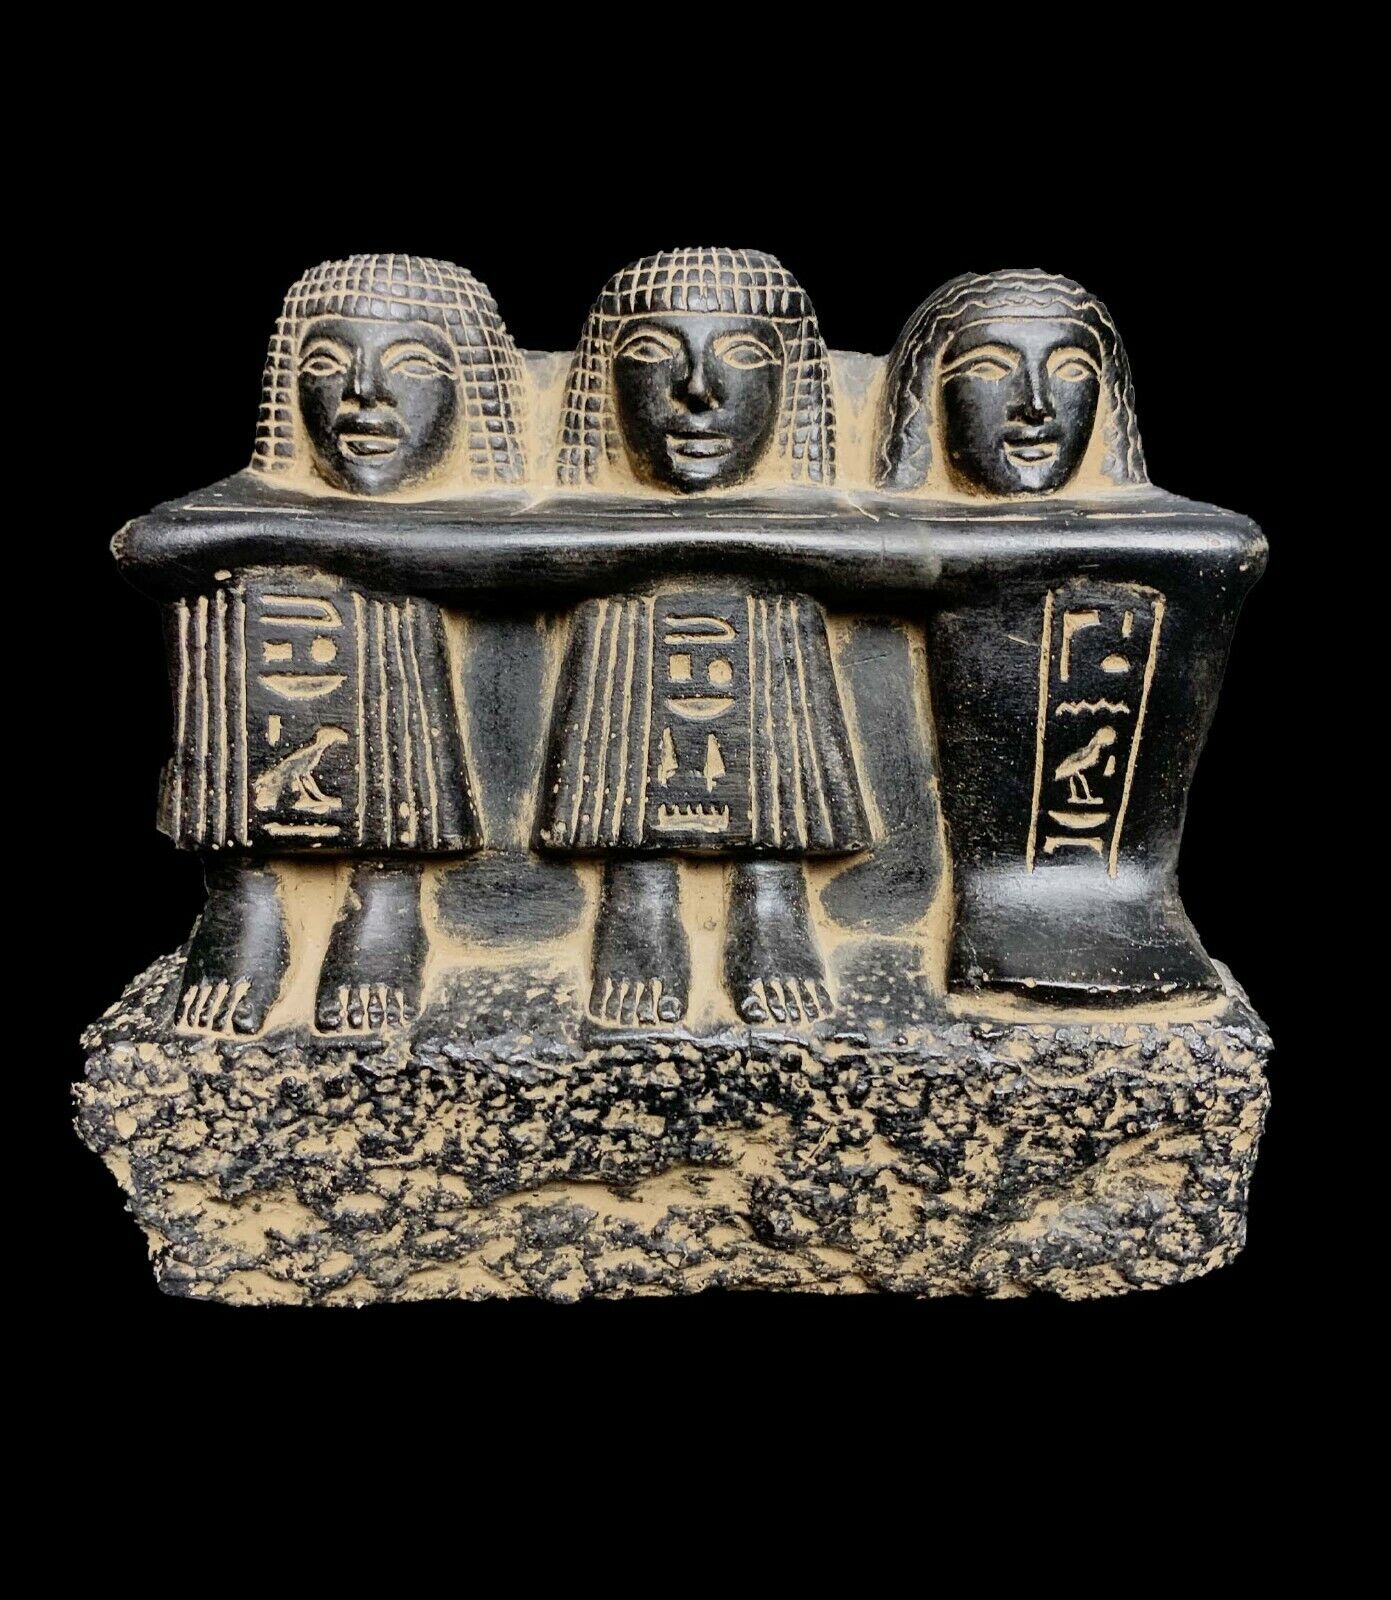 Unique Statue of The Family Group of Three Egypt 1850-1800 BCE